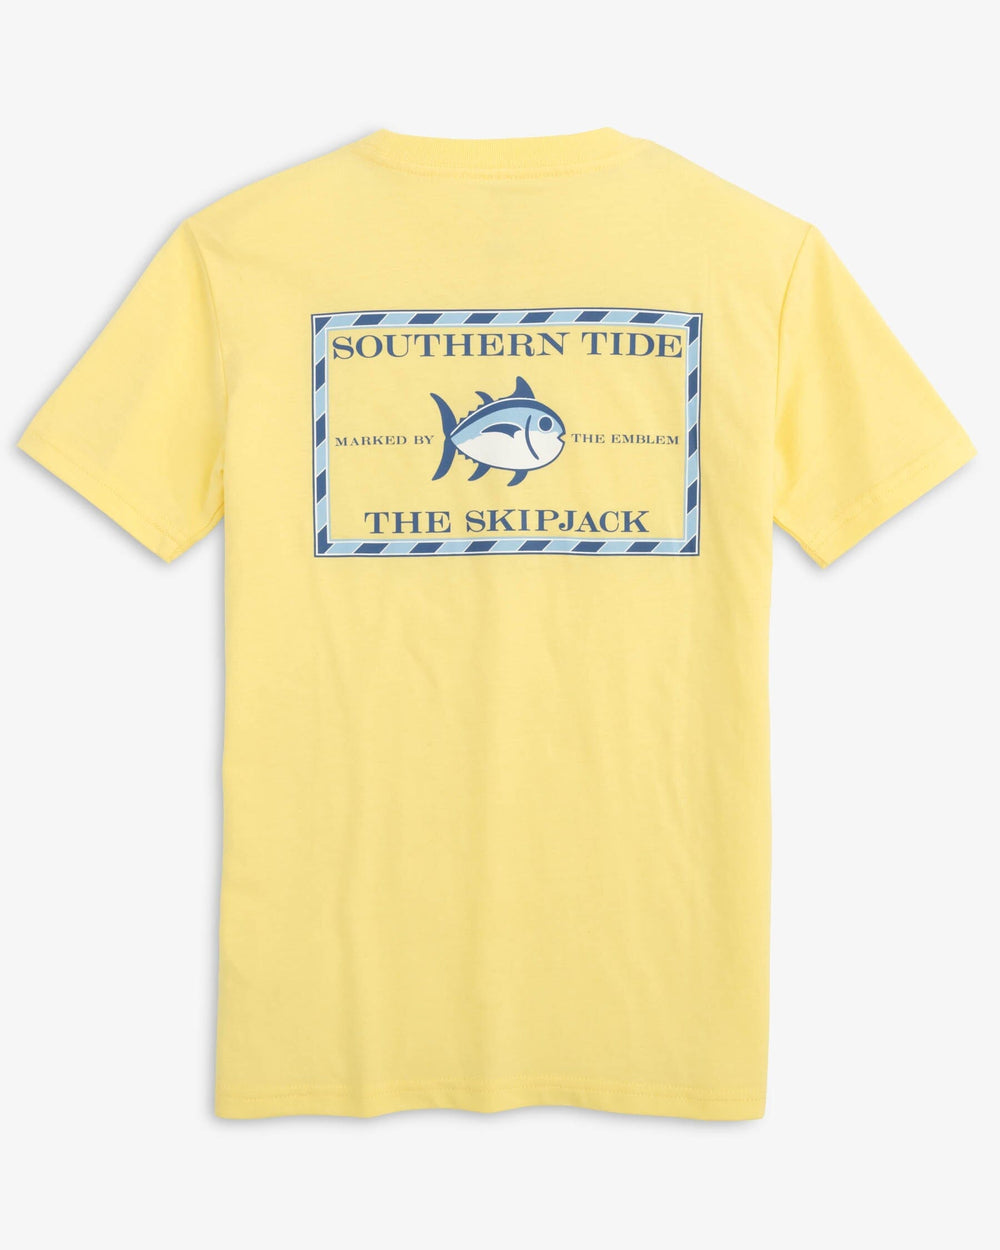 The back view of the Southern Tide Youth Original Skipjack T-Shirt by Southern Tide - Tuscan Sun